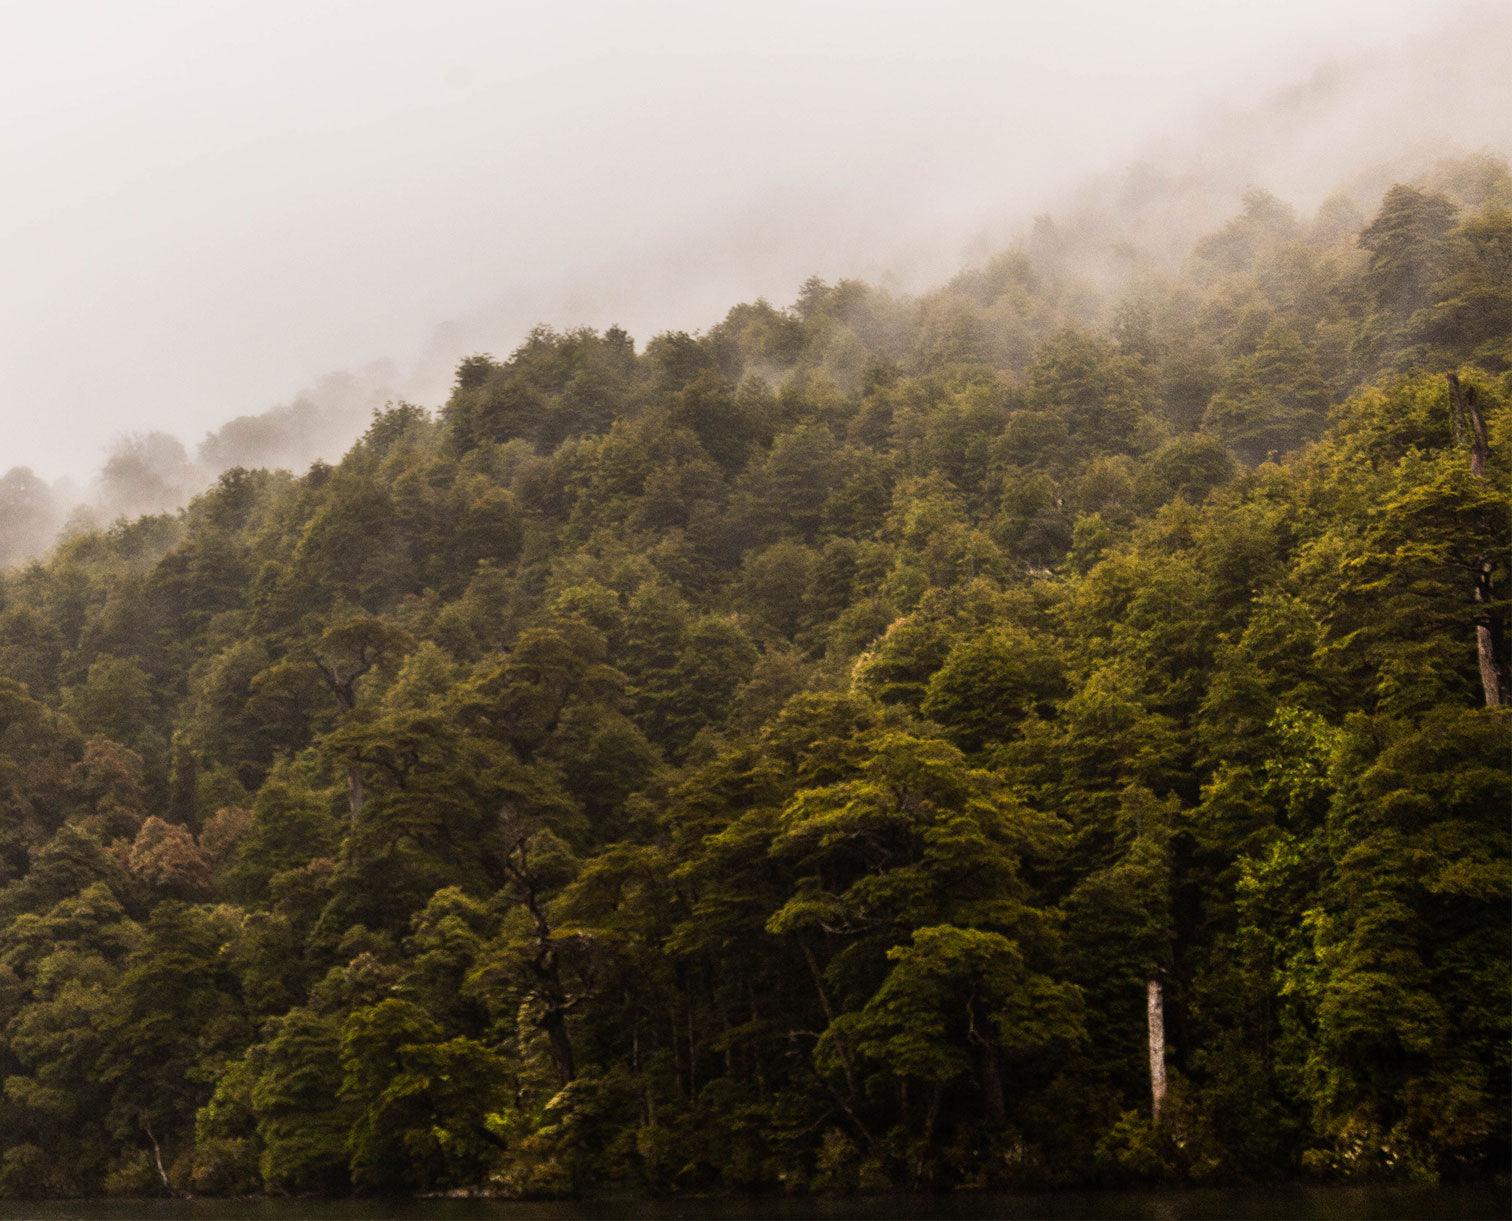 Image of a jungle with mist in the air 